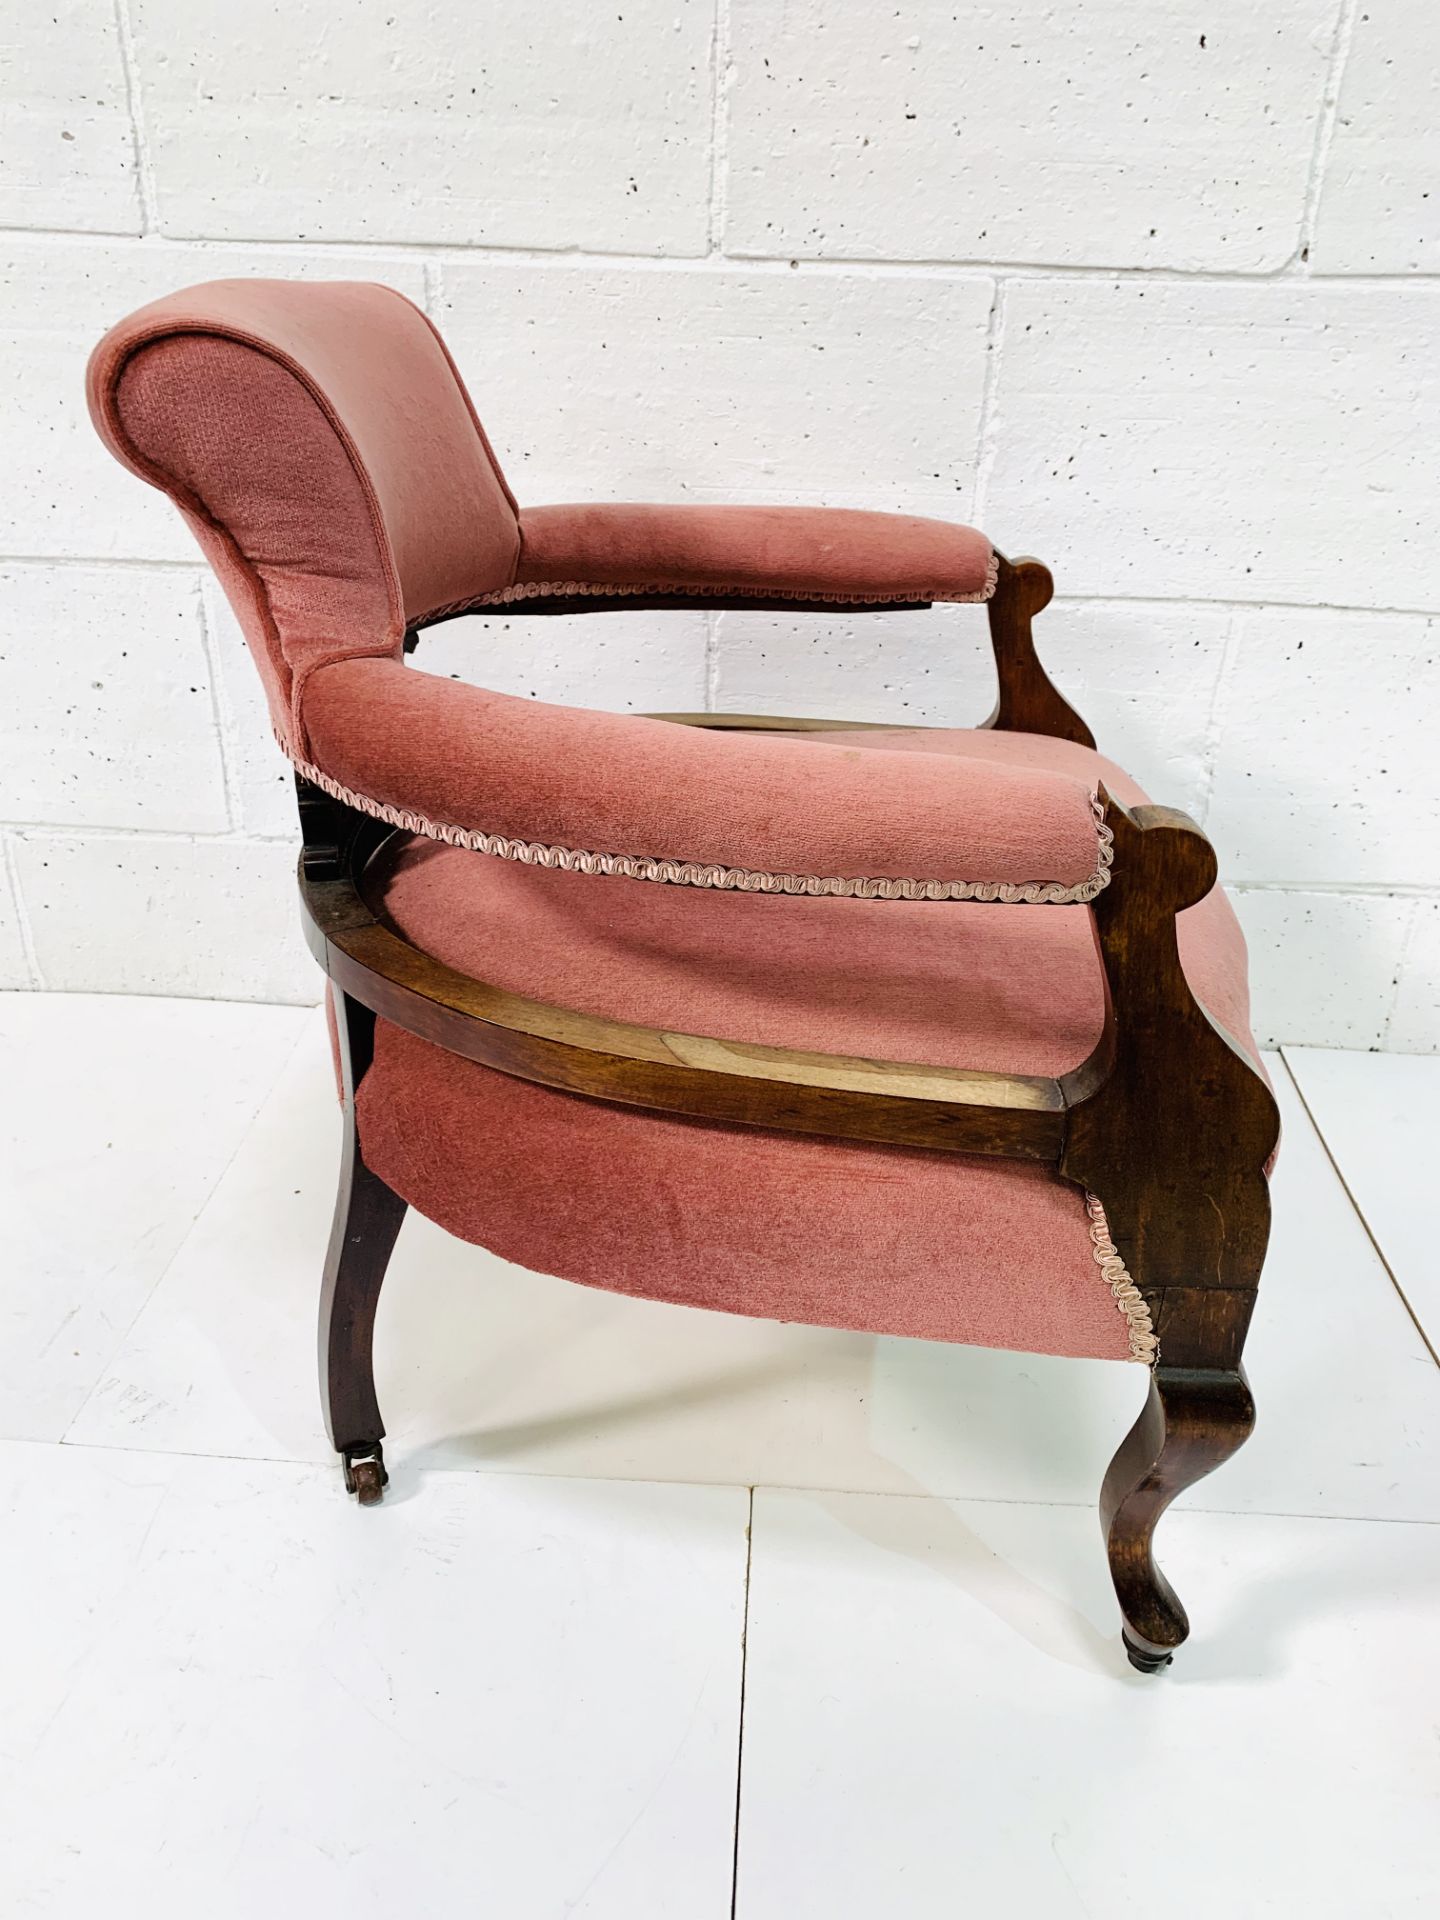 Mahogany pink velvet upholstered open arm chair with shaped legs. - Image 3 of 4